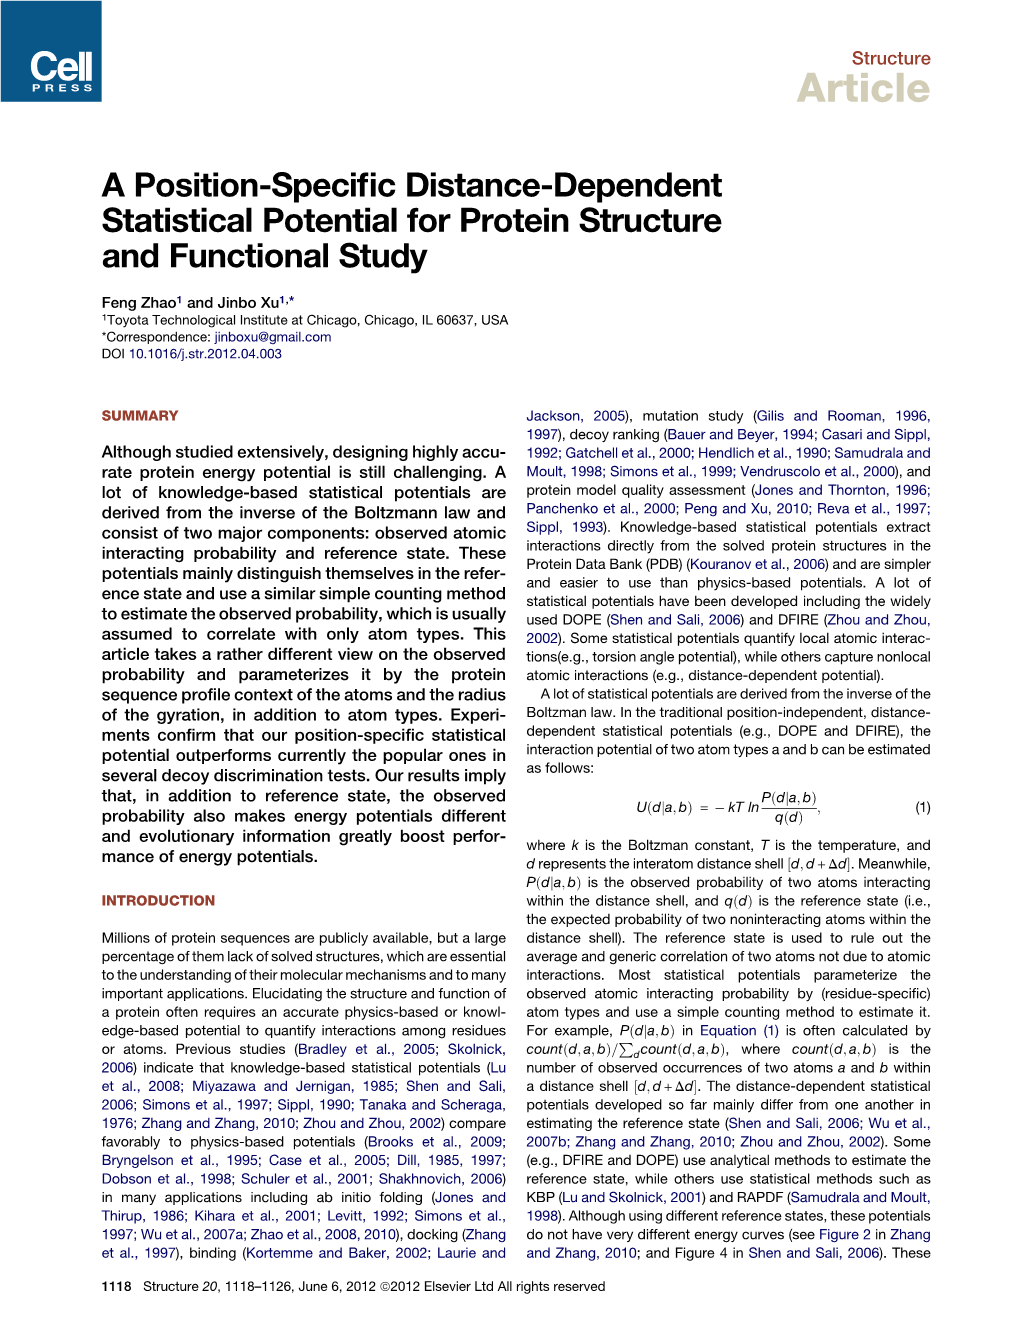 A Position-Specific Statistical Potential for Protein Structure and Functional Study